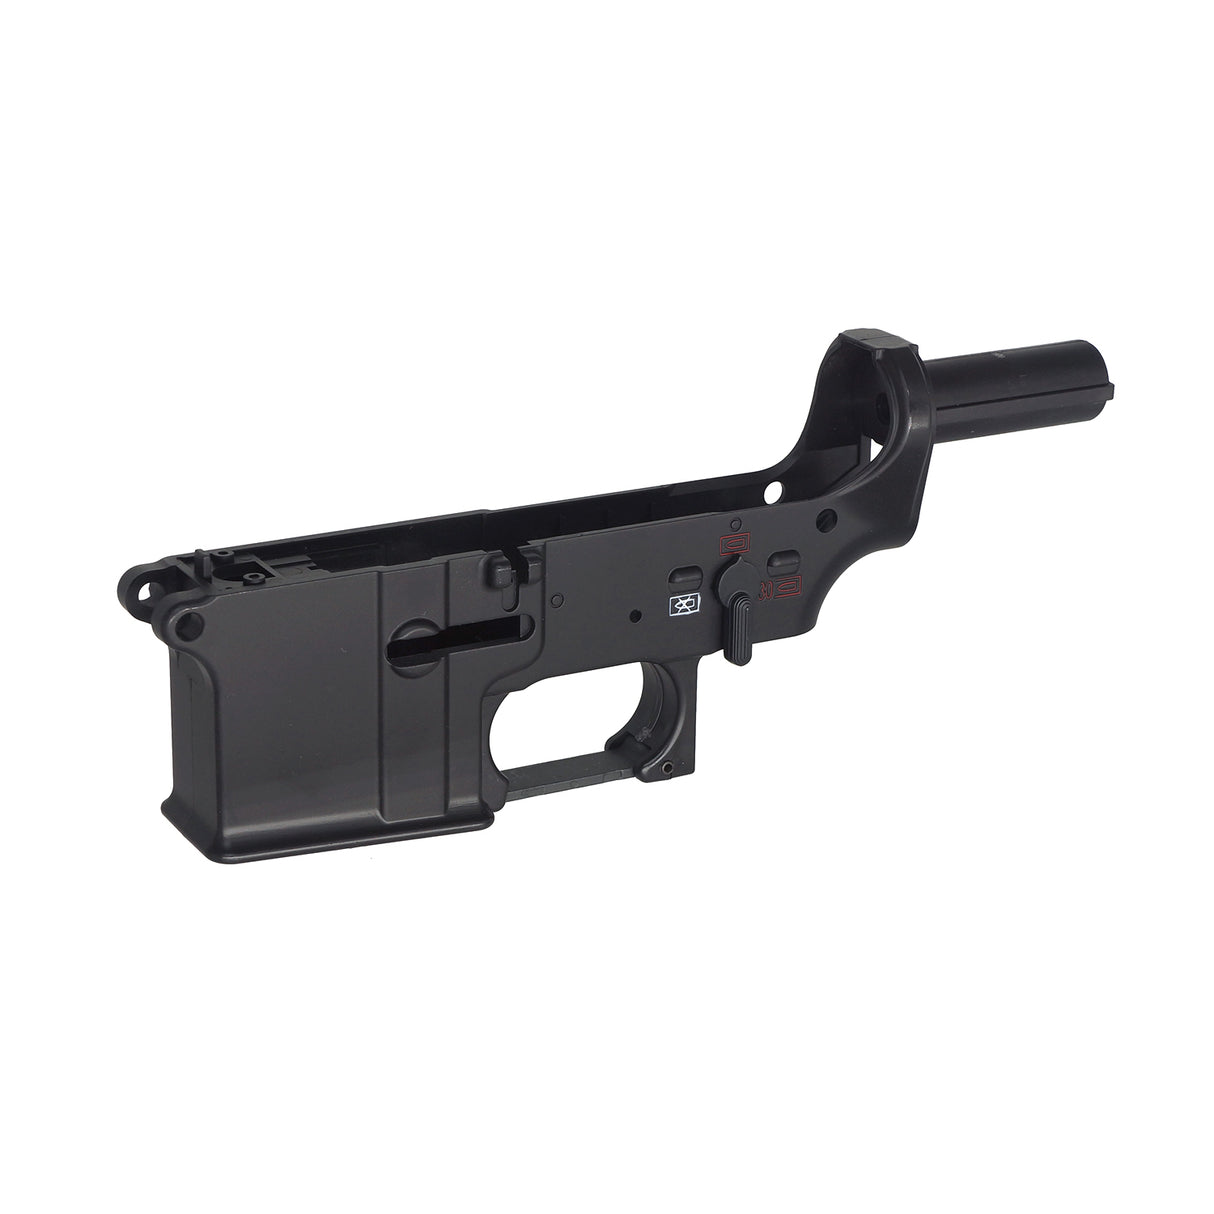 Golden Eagle Original Replacement Lower Receiver for 416 AEG ( GE-M-148 )